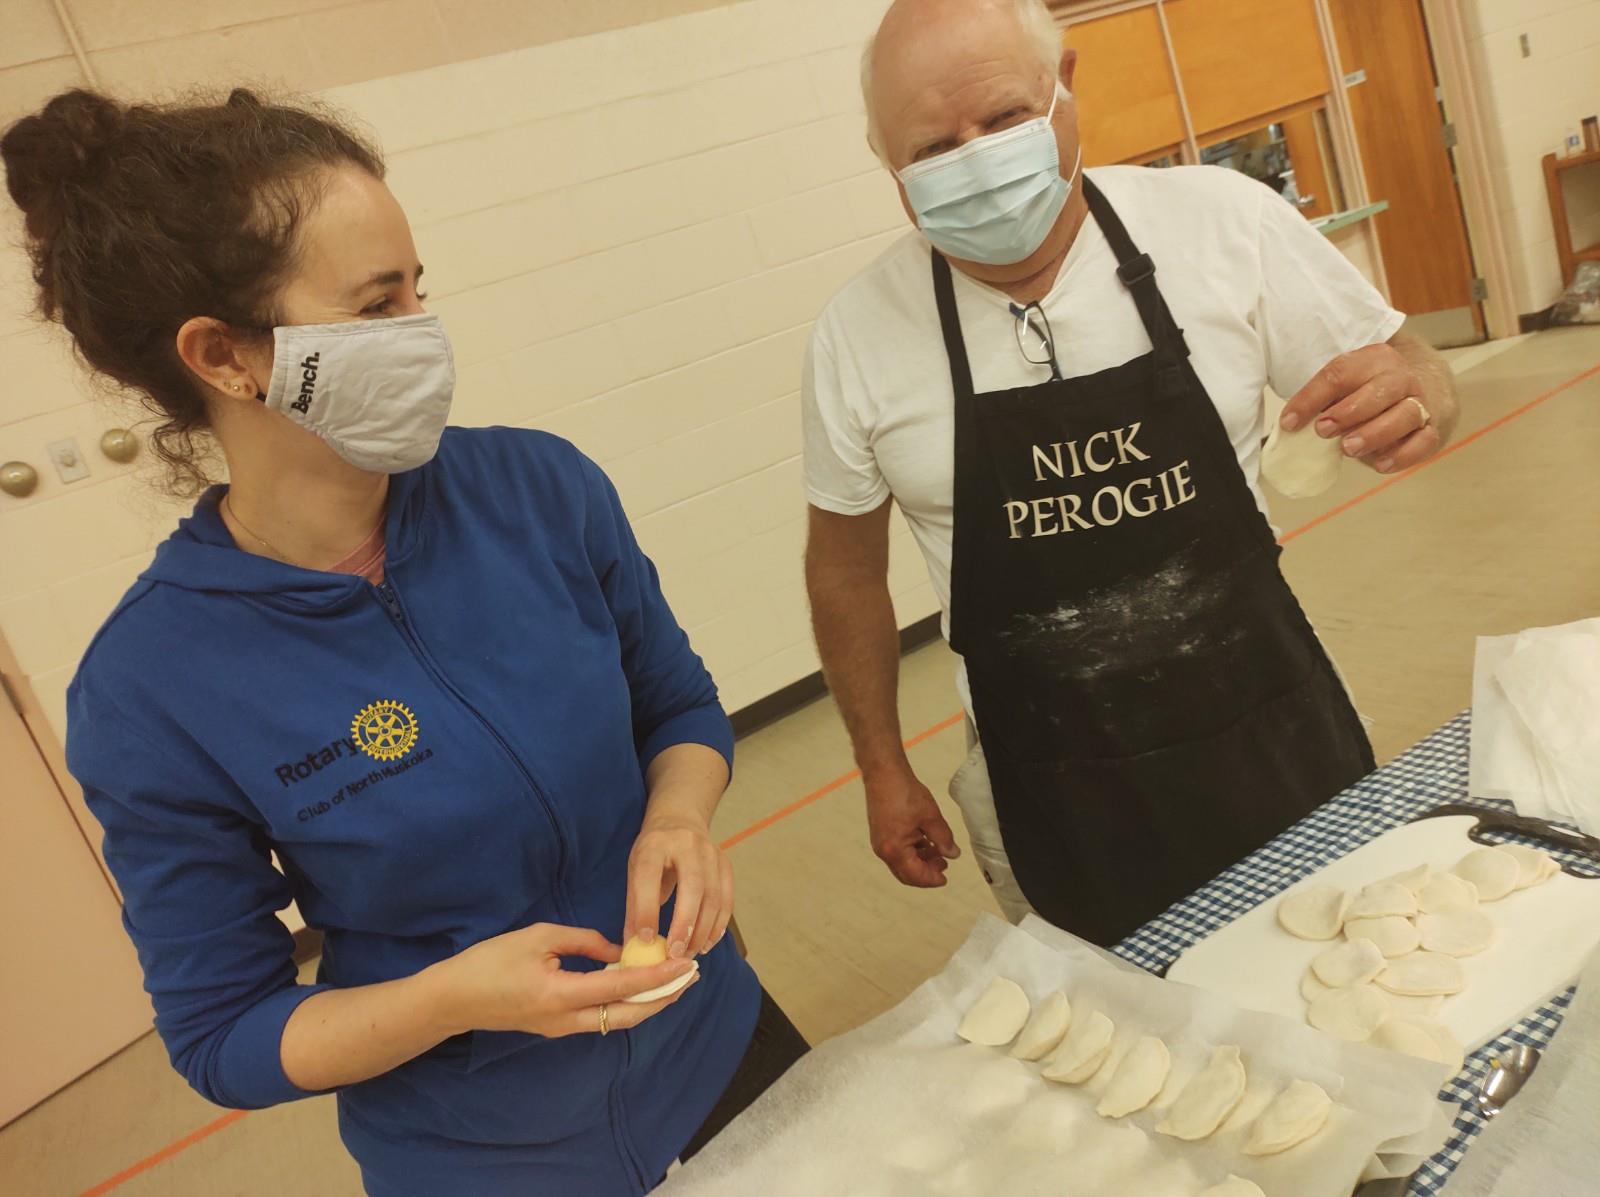 A woman and a man, both wearing face coverings, smile while making perogies.